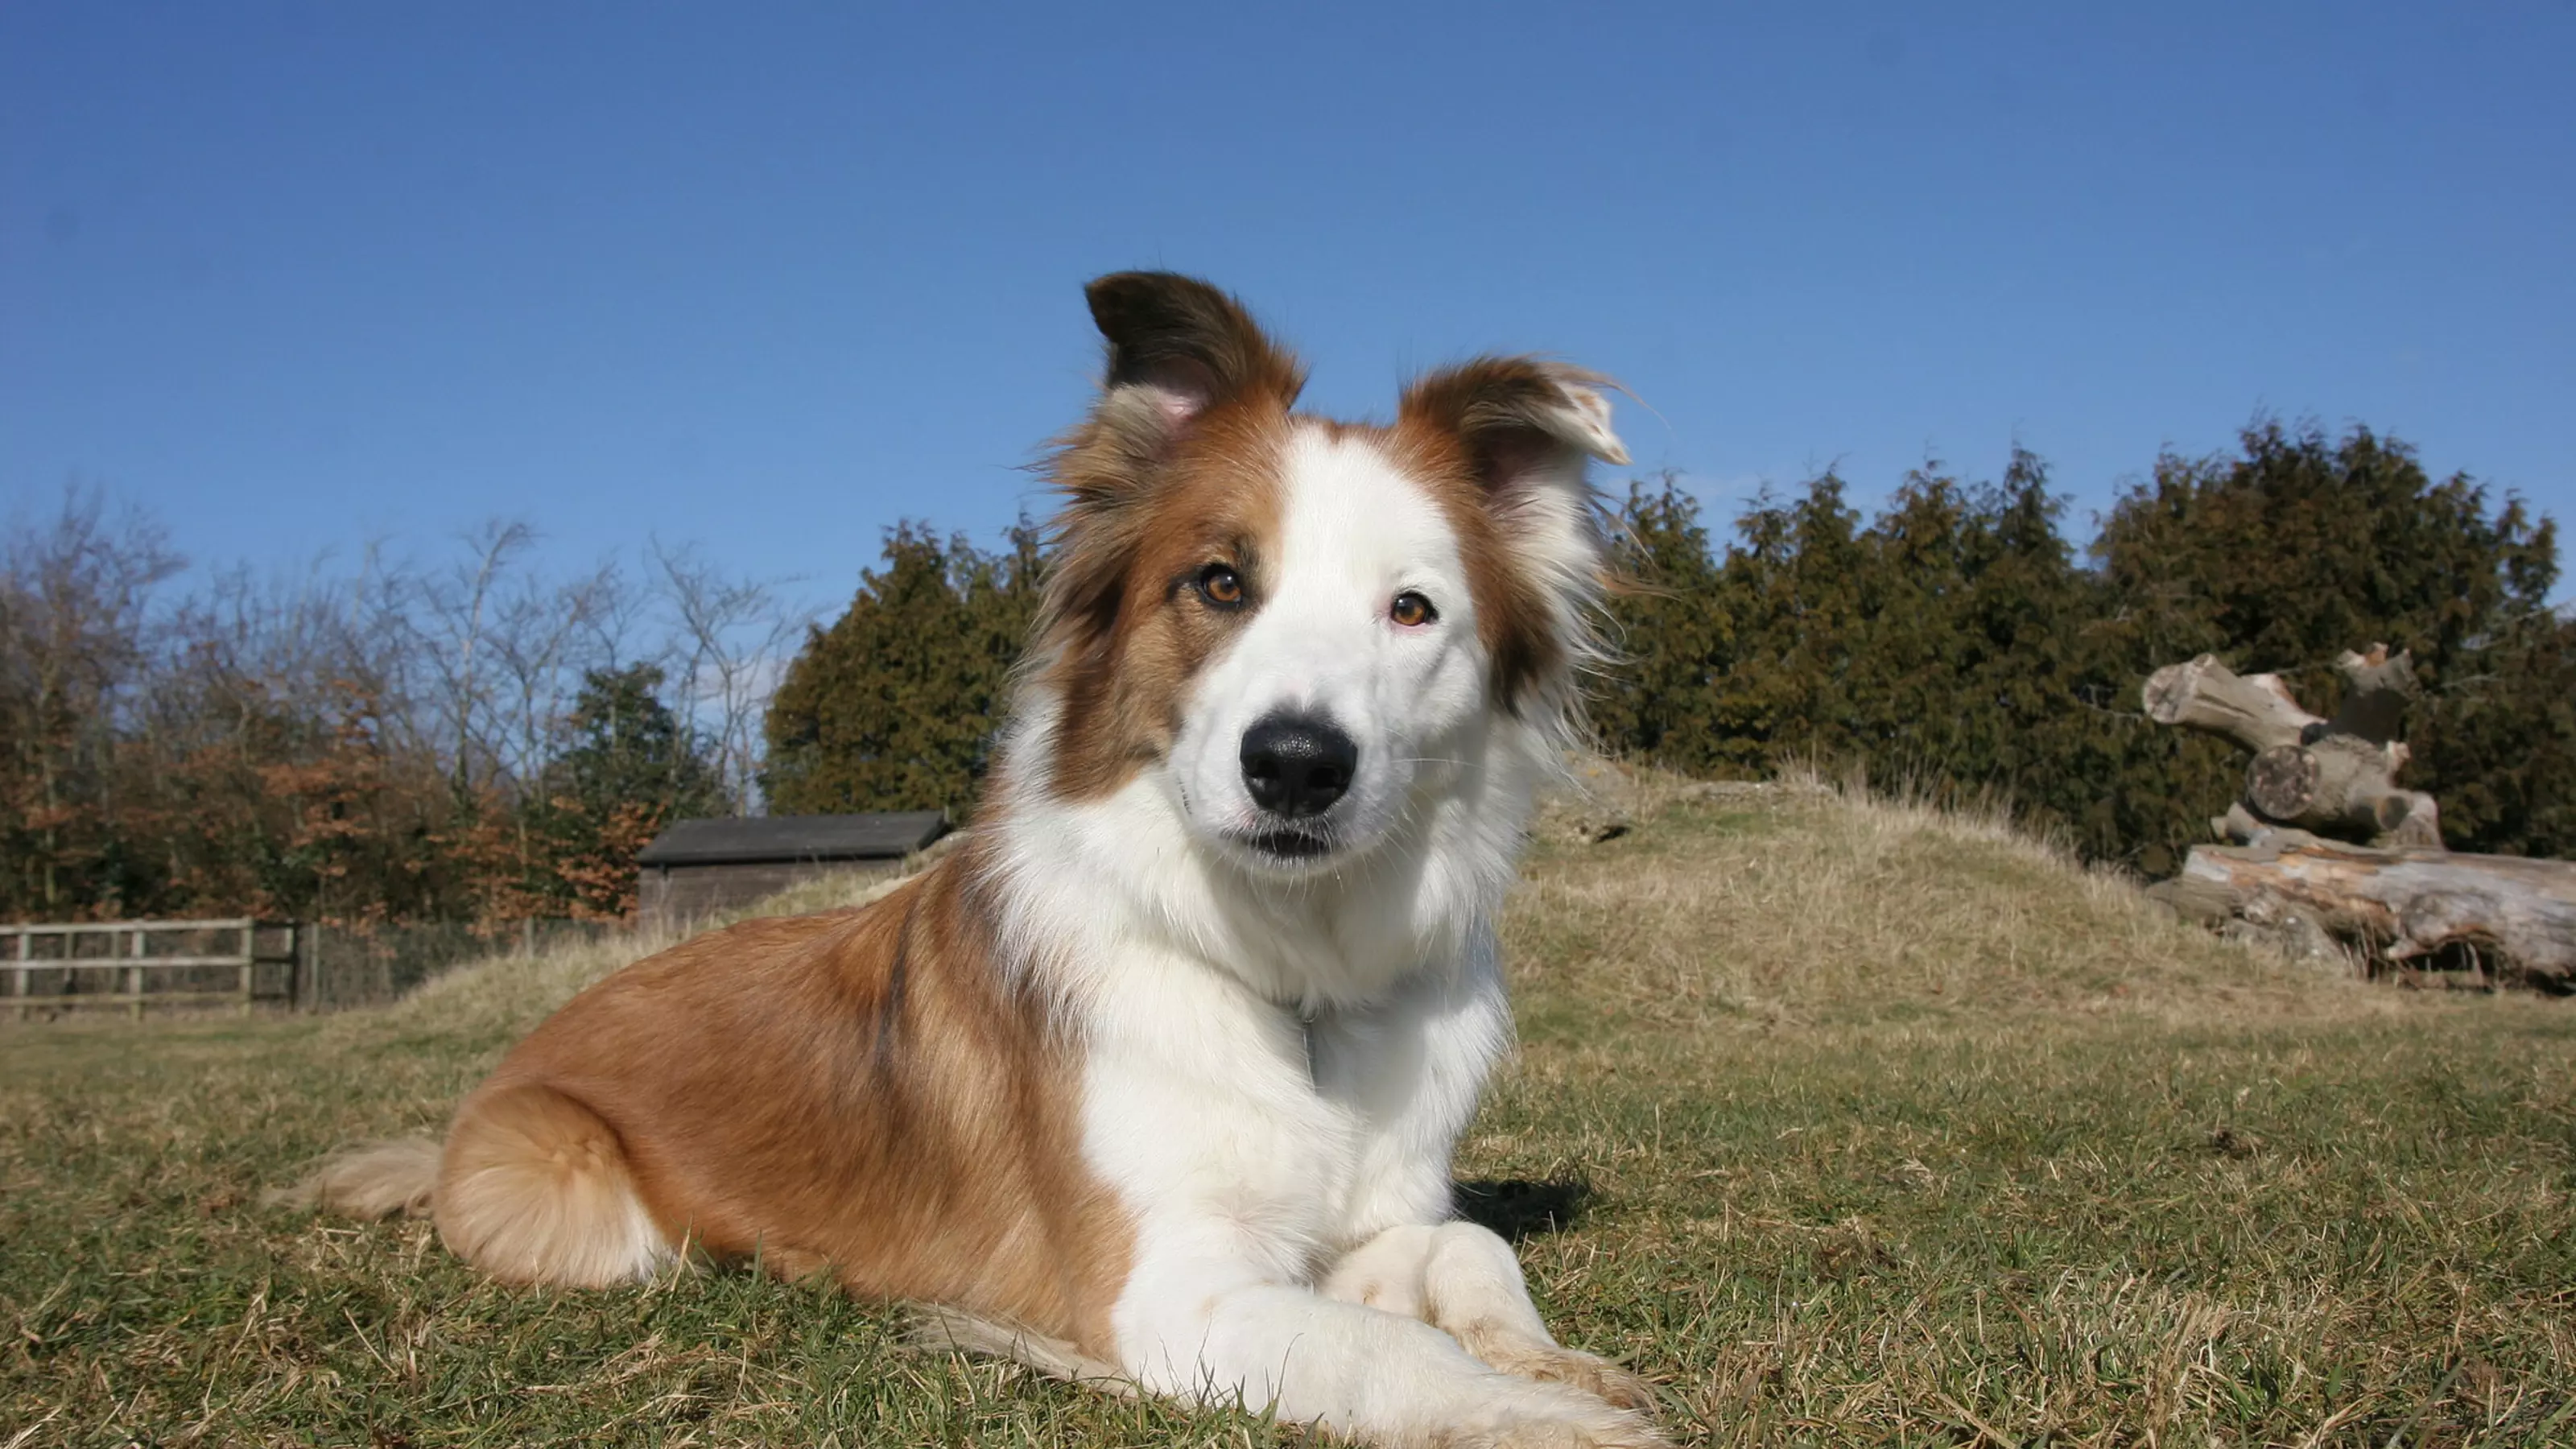 Buddy, a 4-year-old collie who was adopted from The Blue Cross by Aileen Holloway